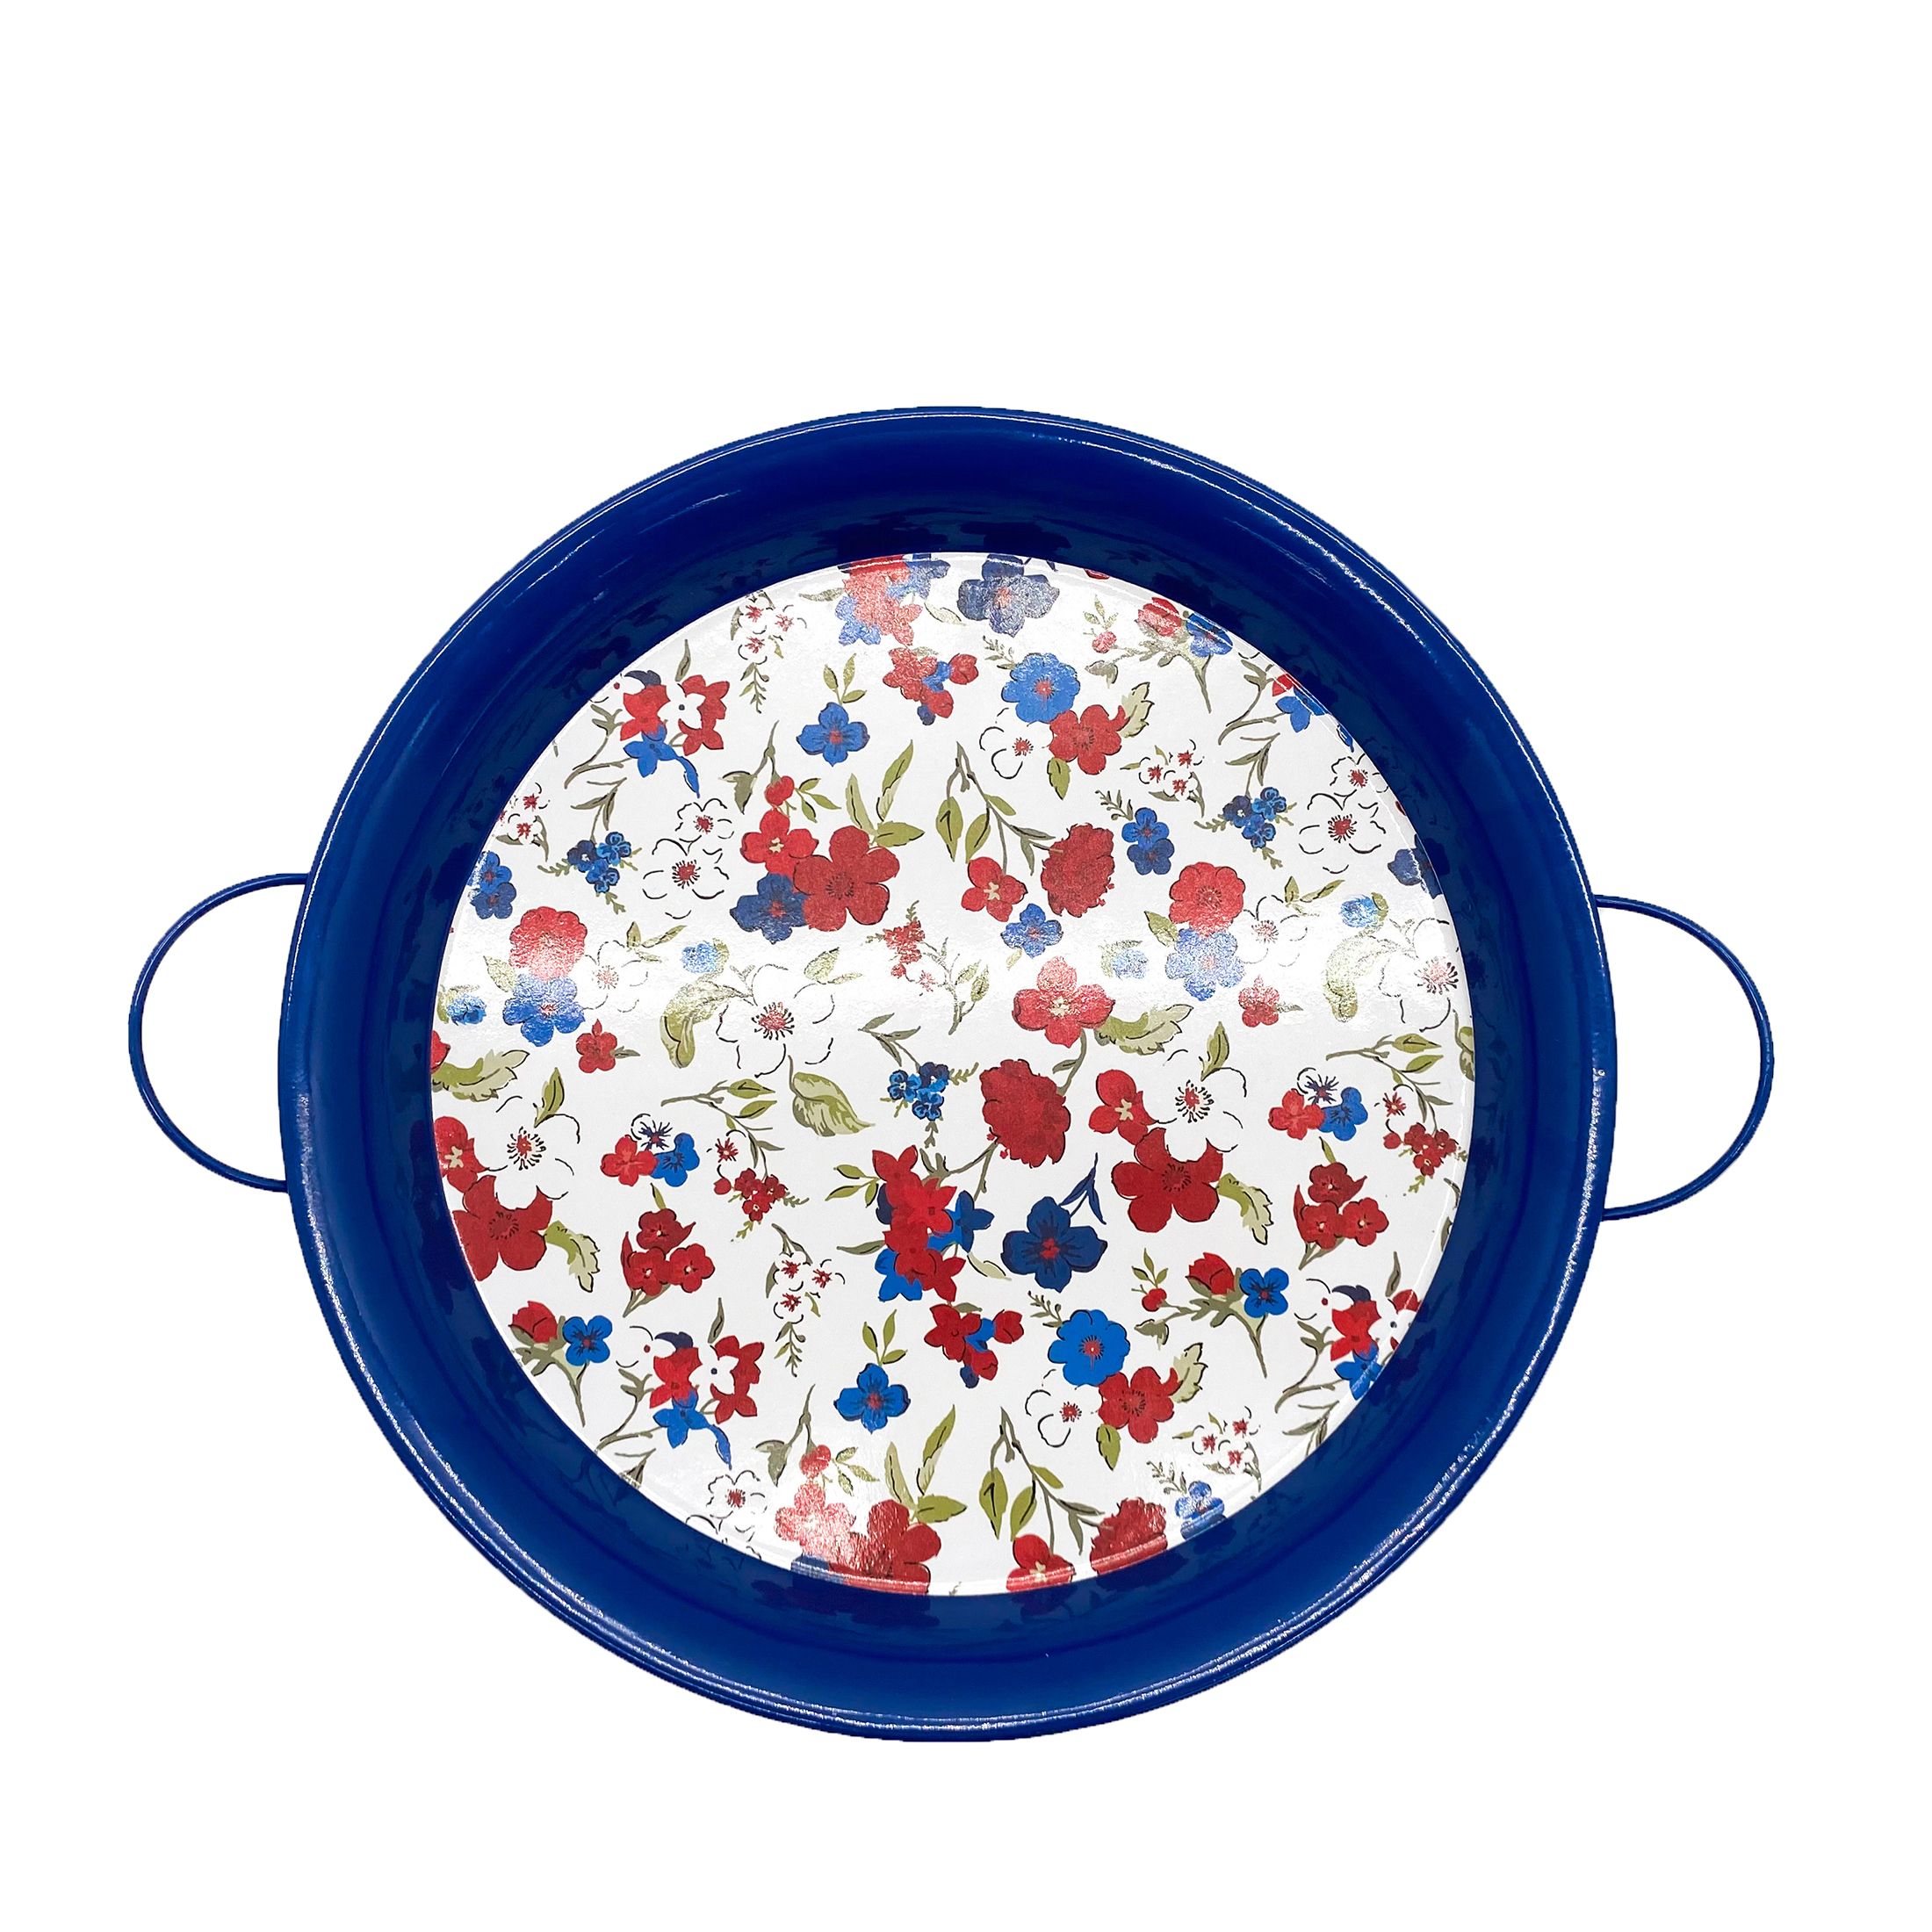 The Pioneer Woman Floral Round Tray